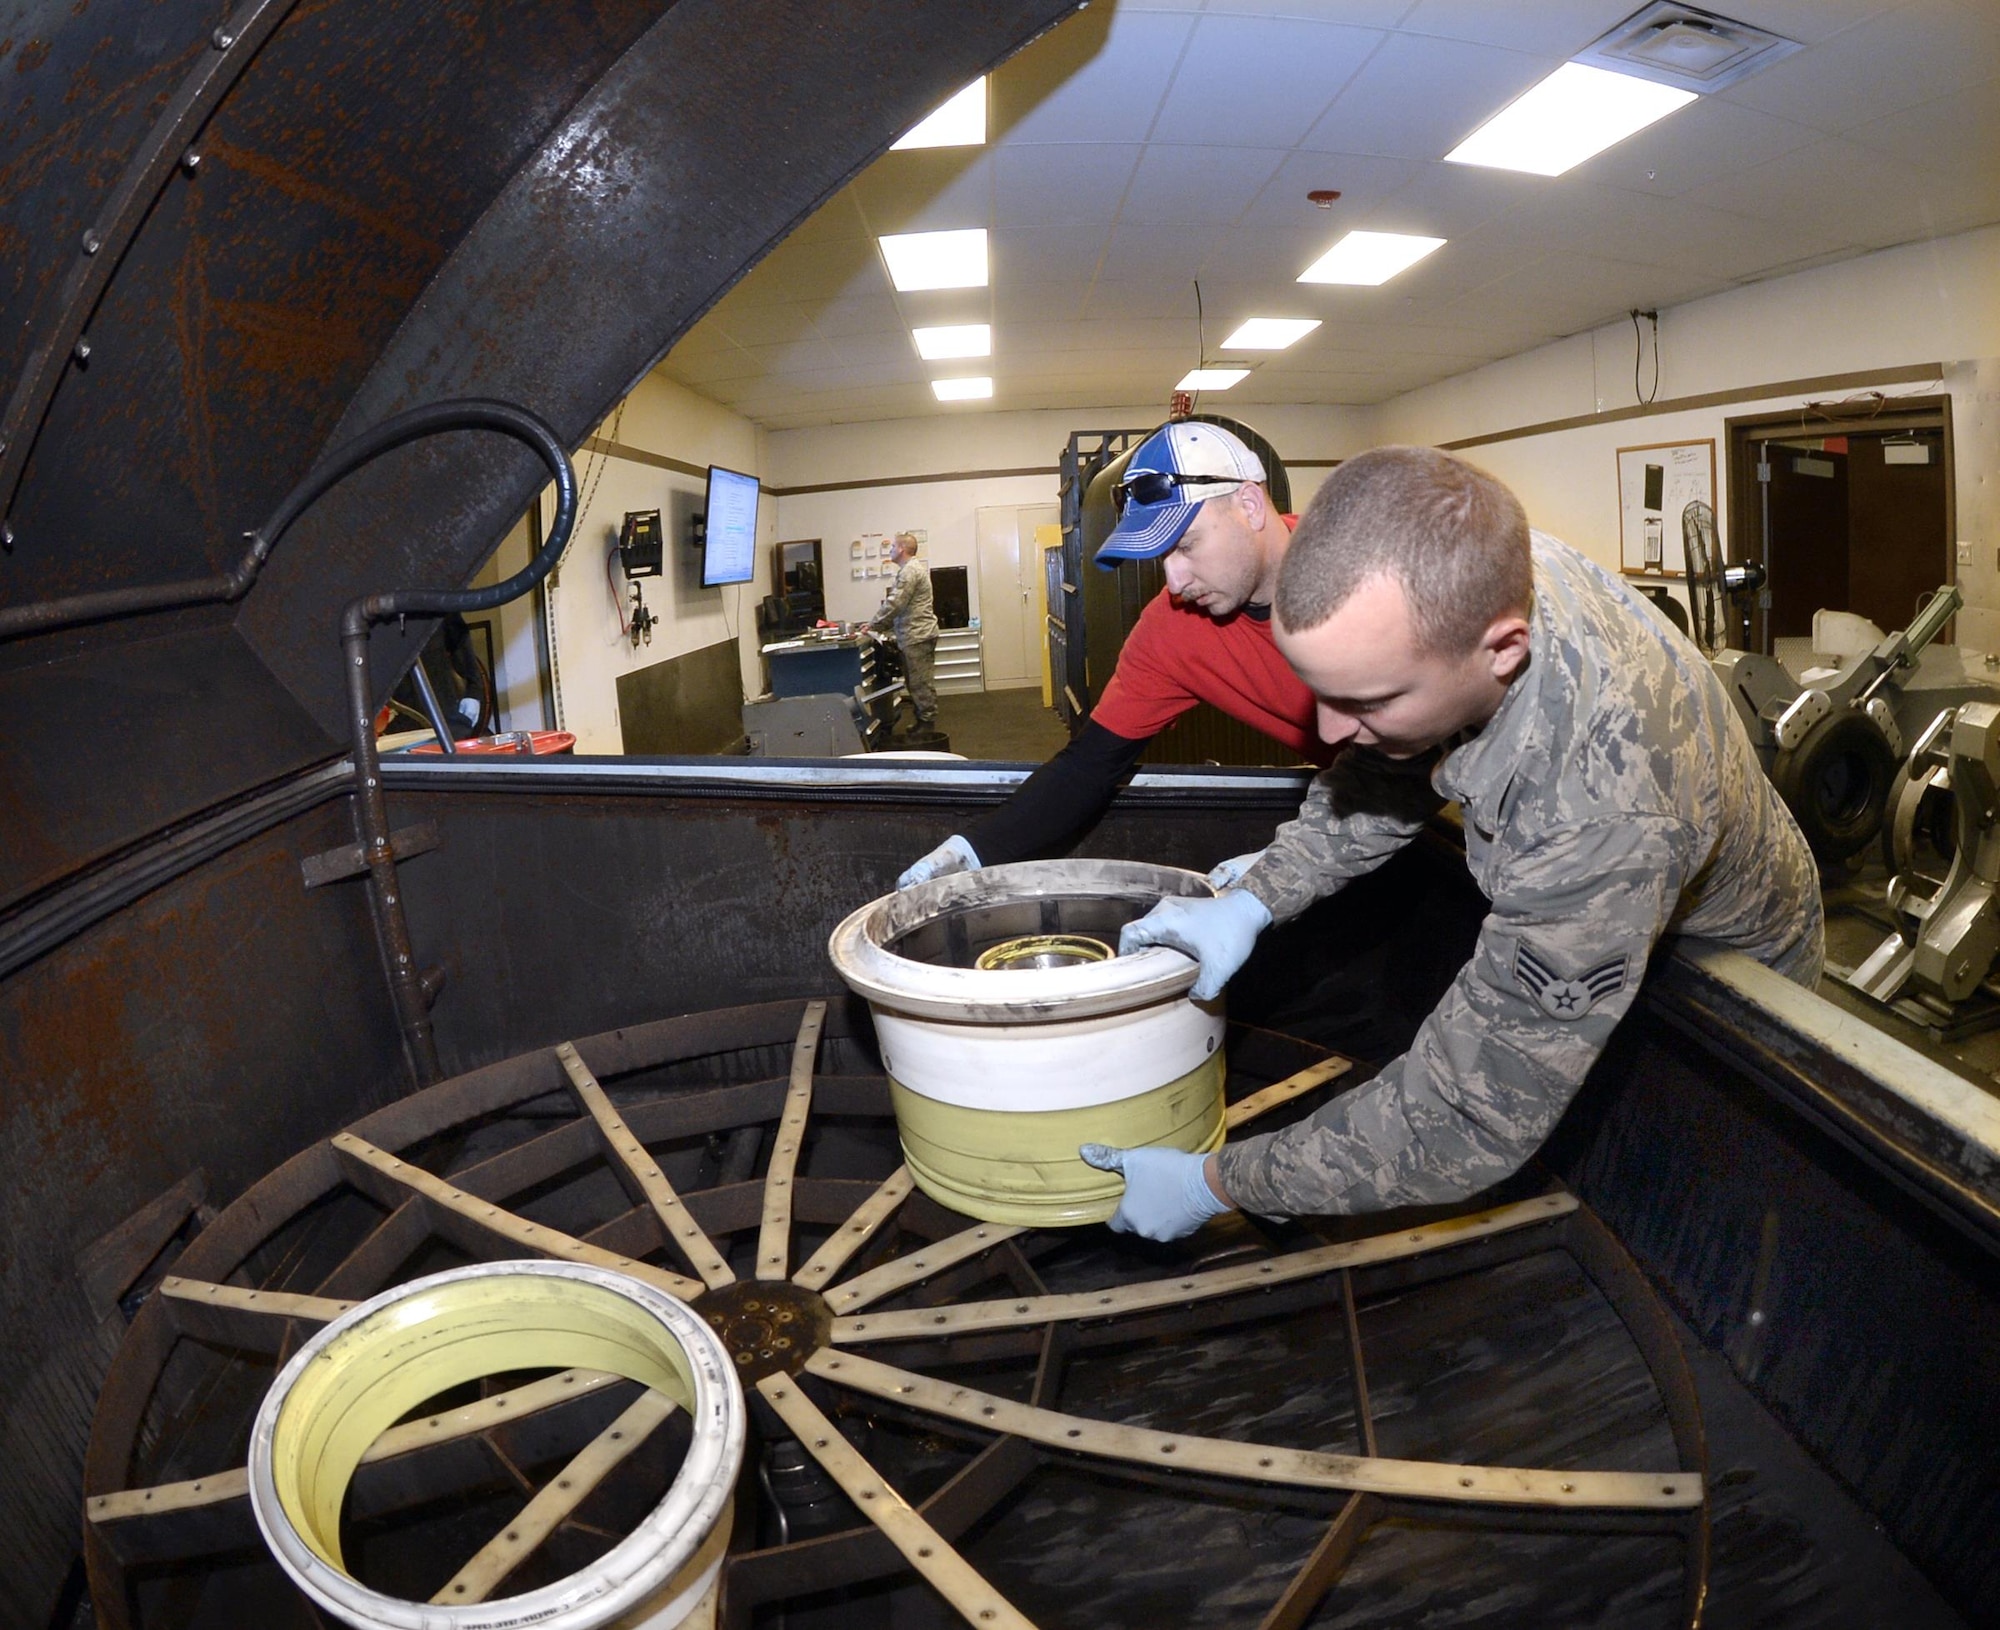 Tech. Sgt. James Speicher, an air reserve technician with the 419th Maintenance Squadron, and Senior Airman Joseph Sprowls, of the 388th Maintenance Squadron, load F-35 Lightning II wheels into a parts washer May 20, 2016, at Hill Air Force Base, Utah. (U.S. Air Force photo/Todd Cromar)